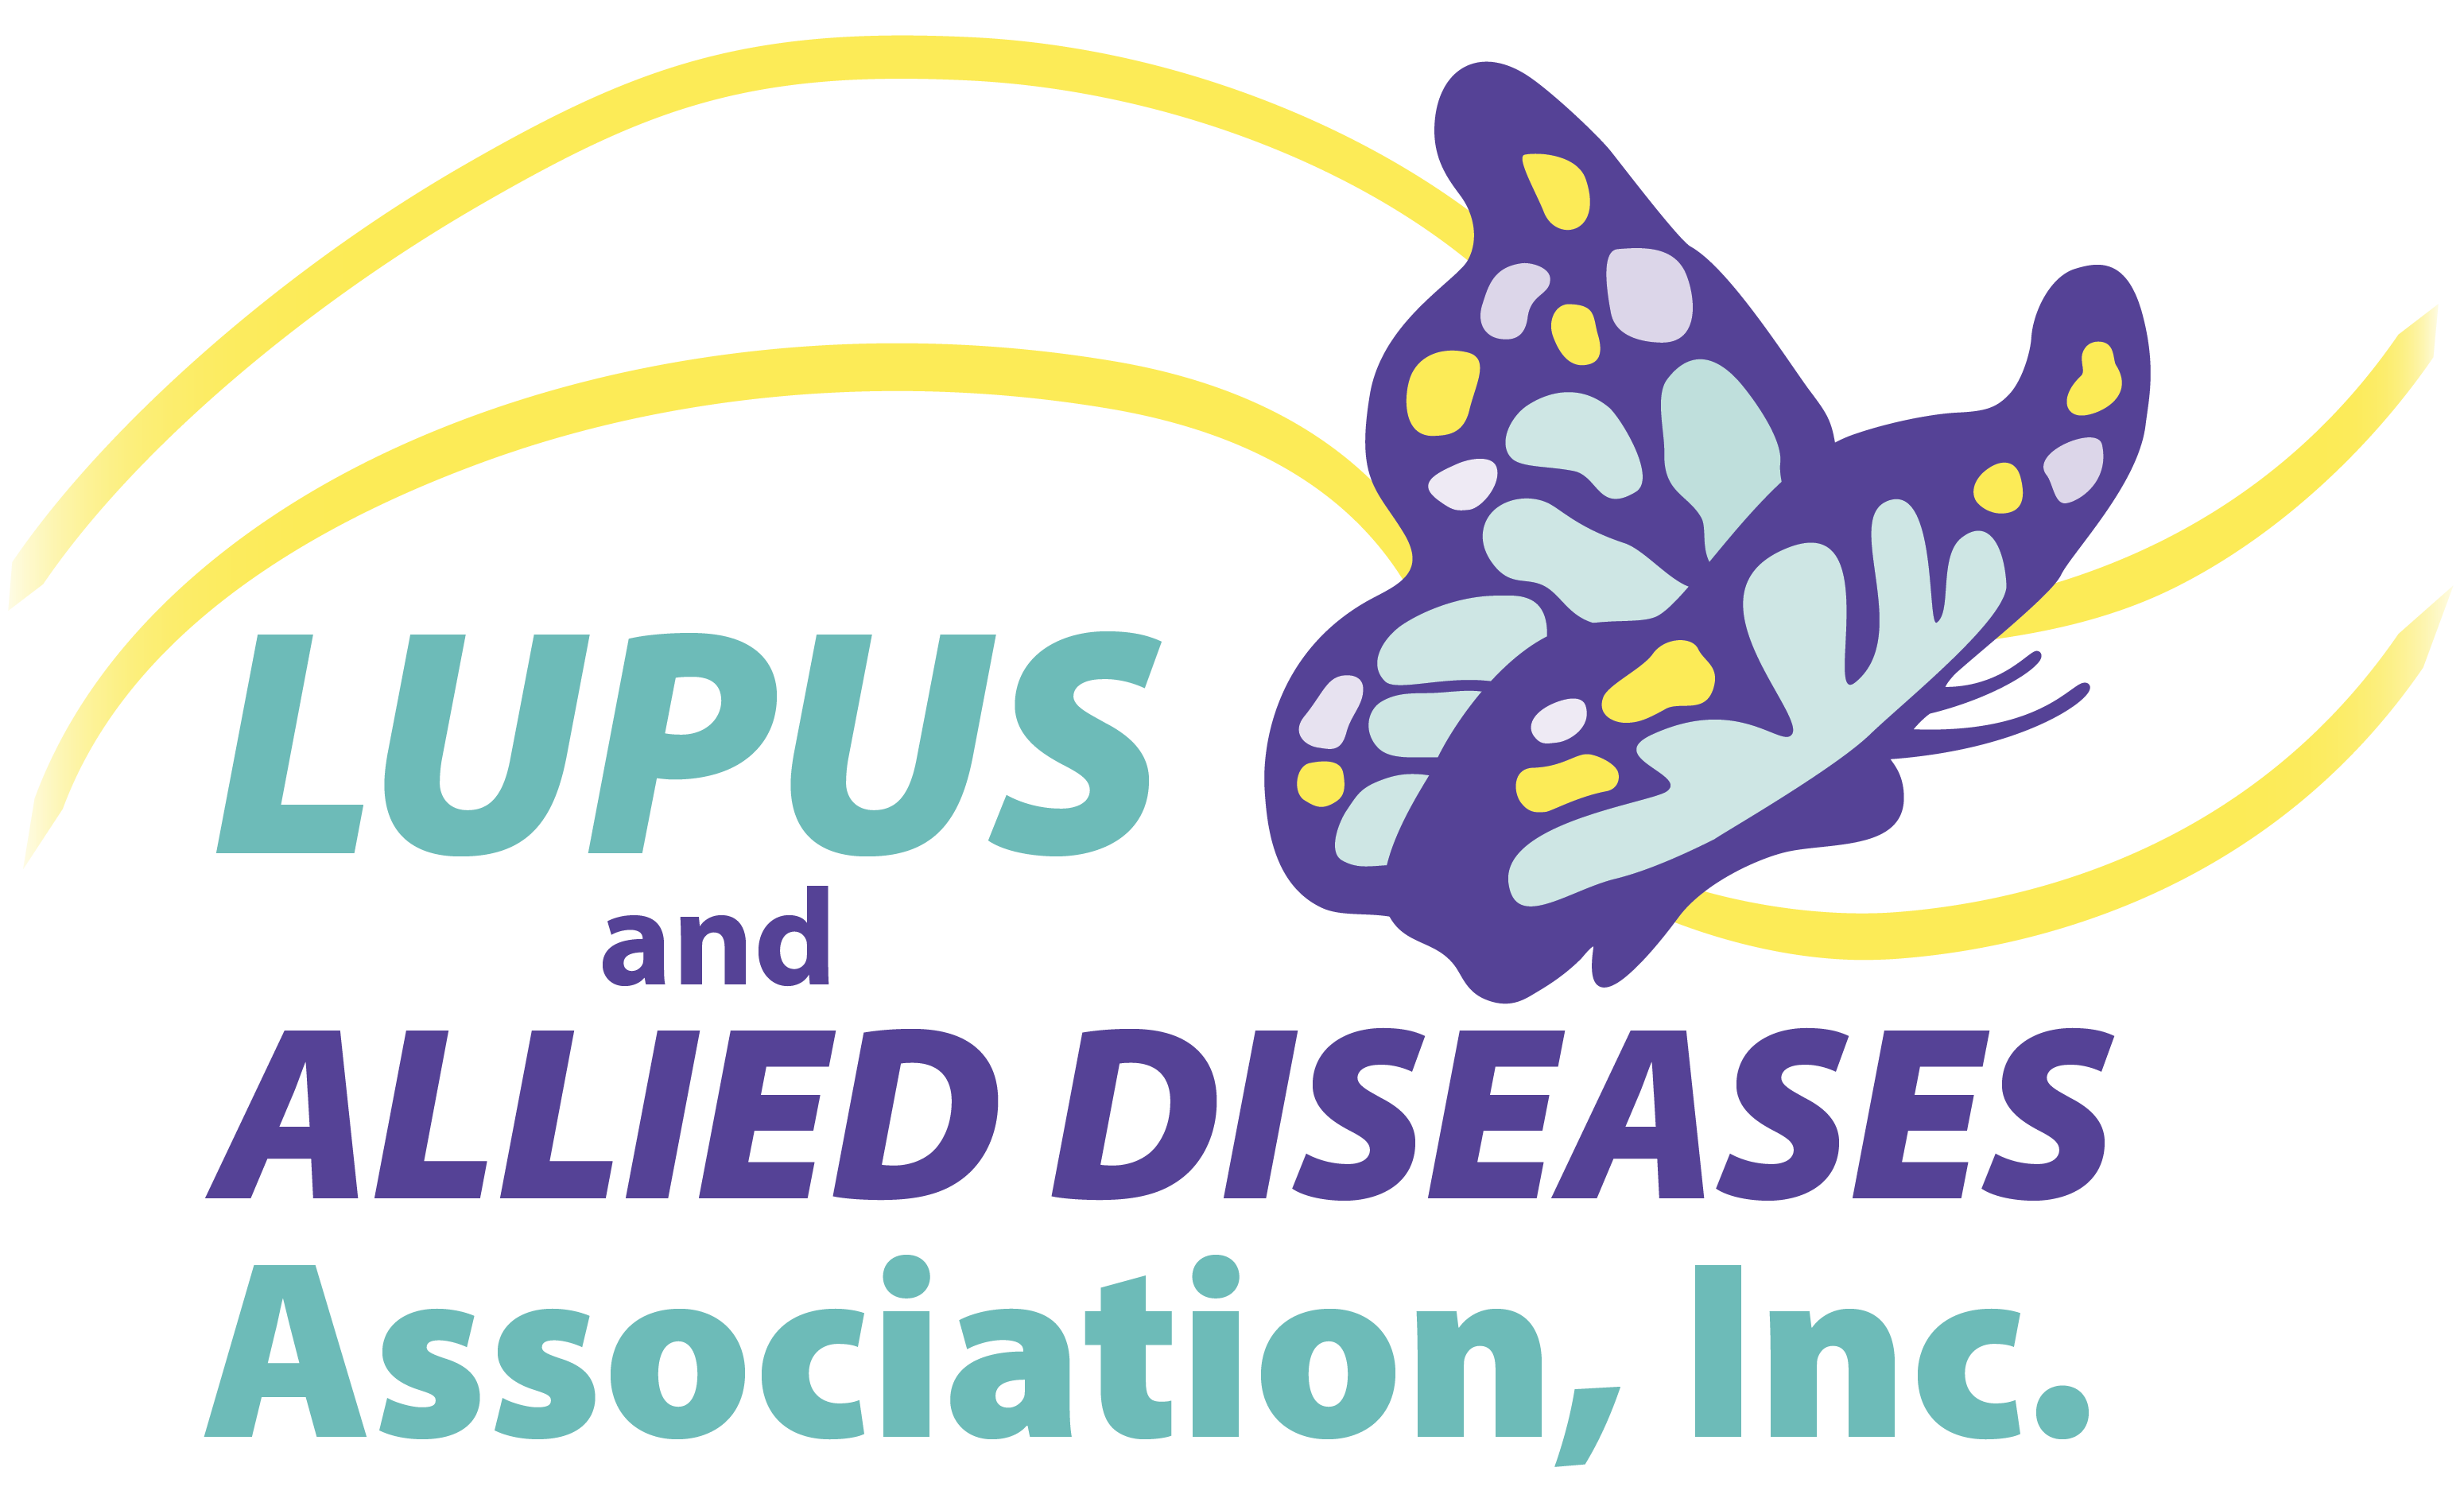 Lupus and Allied Diseases Association, Inc.